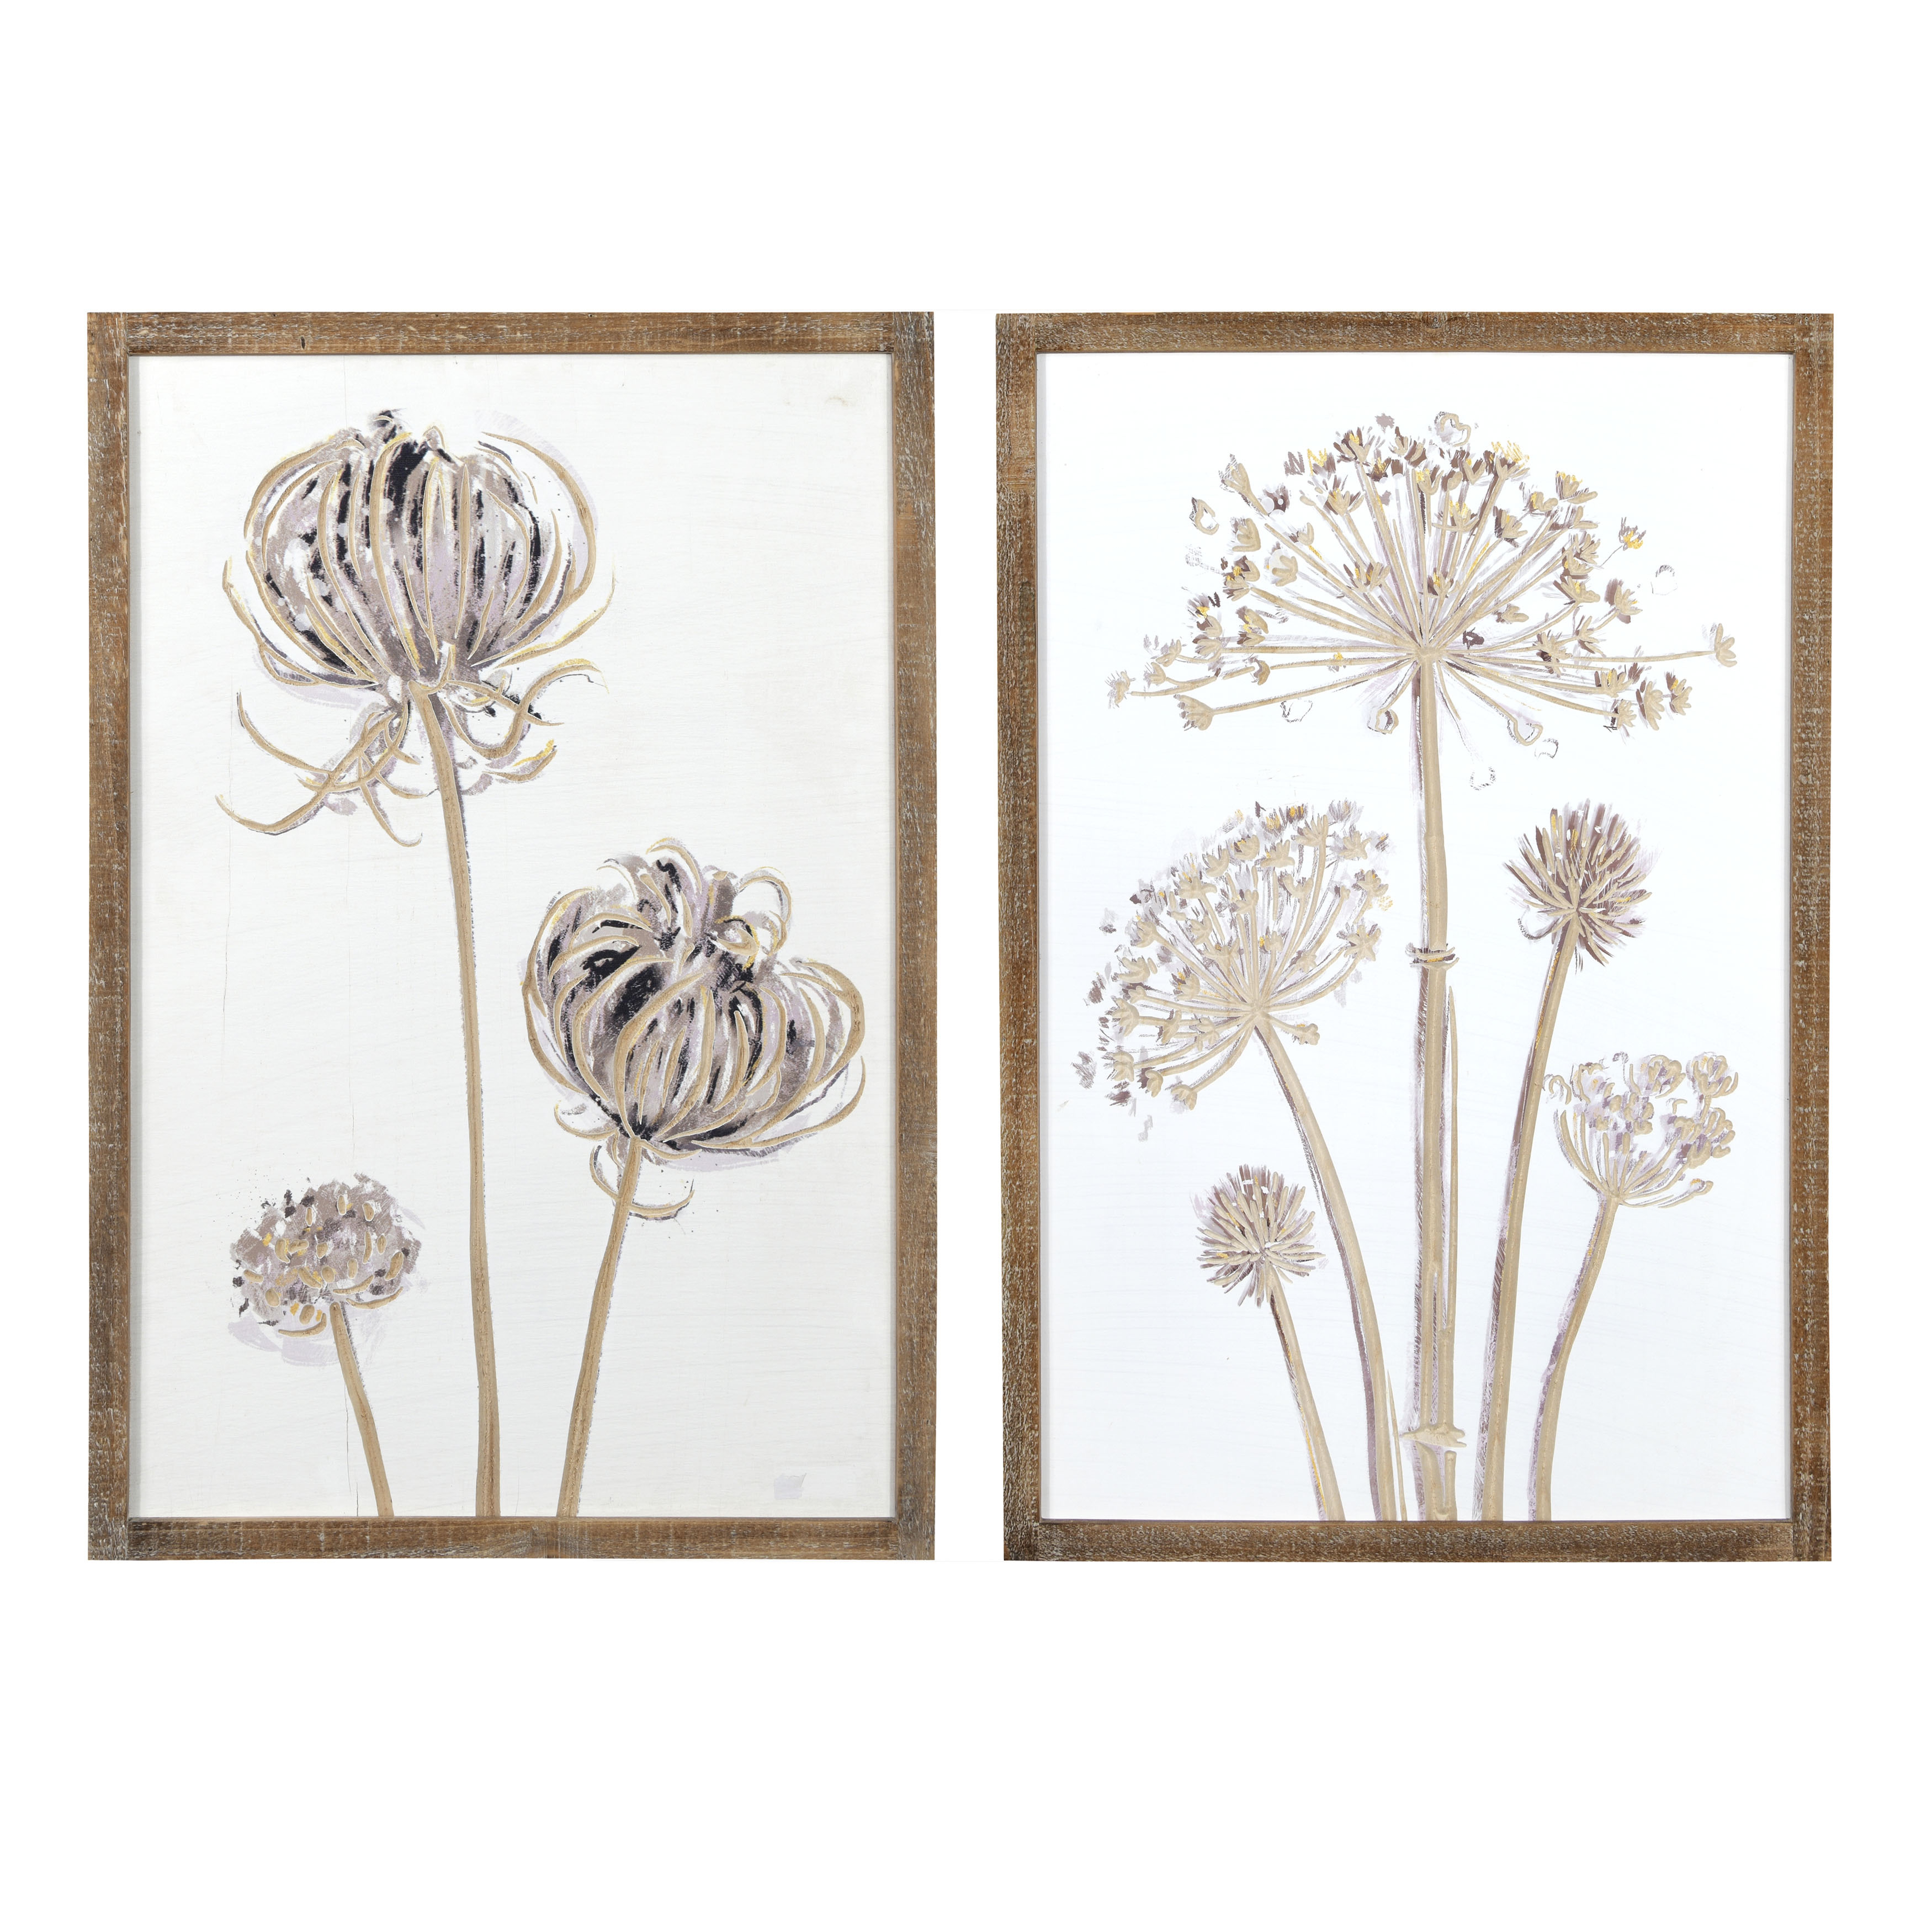 20.25"W x 30"H Engraved Wood Wall Decor with Flower, White, 2 Styles - Moss & Wilder